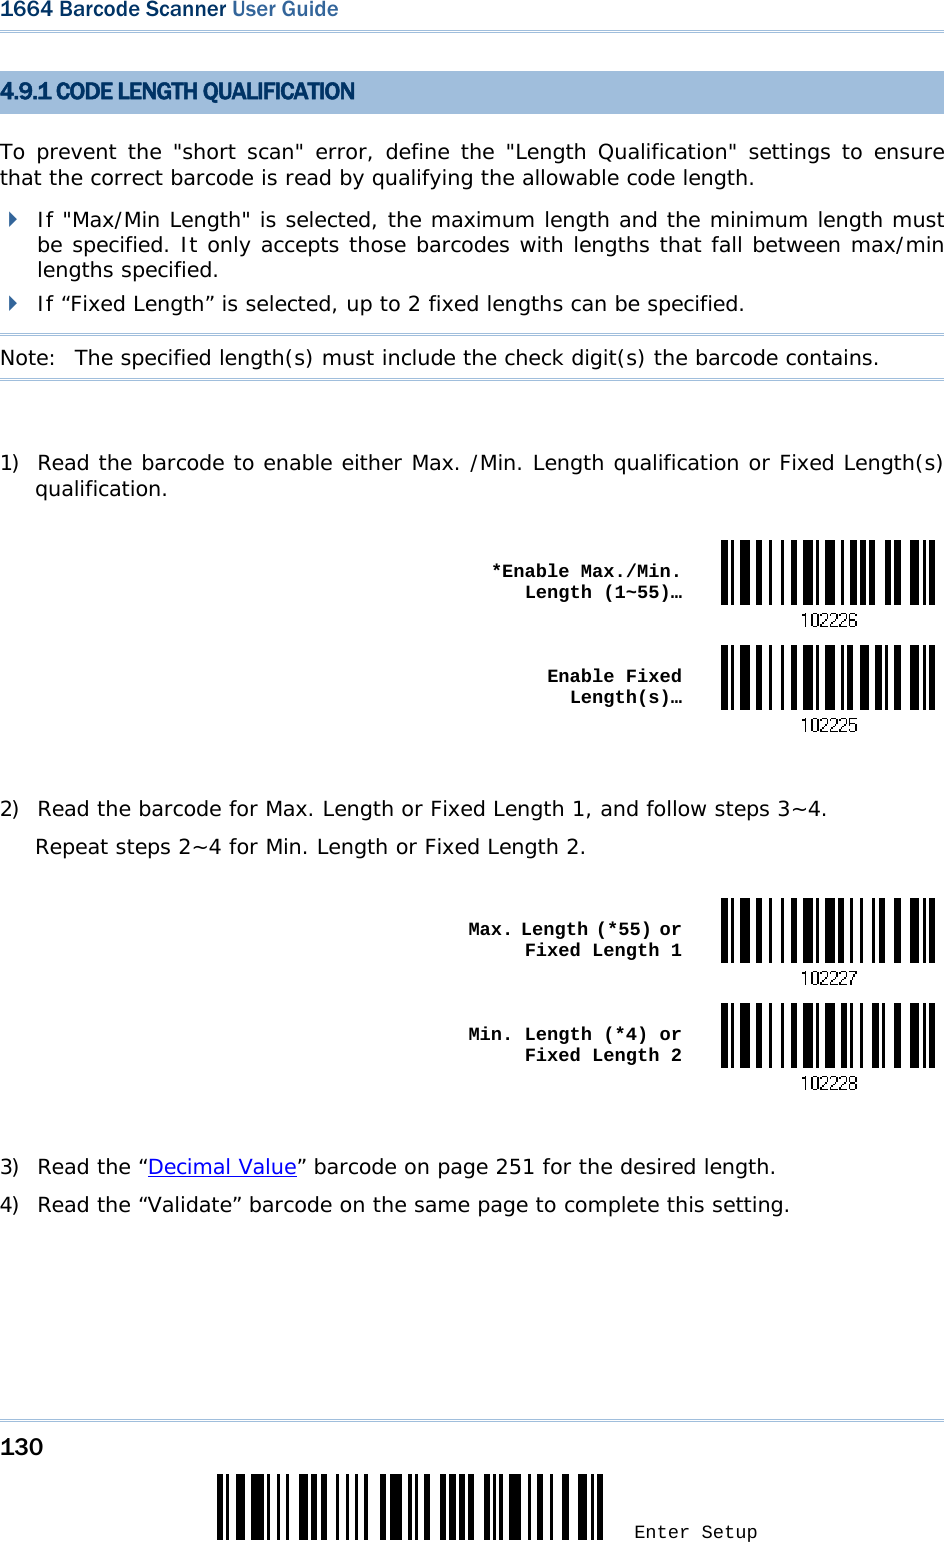 130 Enter Setup 1664 Barcode Scanner User Guide  4.9.1 CODE LENGTH QUALIFICATION To prevent the &quot;short scan&quot; error, define the &quot;Length Qualification&quot; settings to ensure that the correct barcode is read by qualifying the allowable code length.  If &quot;Max/Min Length&quot; is selected, the maximum length and the minimum length must be specified. It only accepts those barcodes with lengths that fall between max/min lengths specified.  If “Fixed Length” is selected, up to 2 fixed lengths can be specified. Note:   The specified length(s) must include the check digit(s) the barcode contains.  1) Read the barcode to enable either Max. /Min. Length qualification or Fixed Length(s) qualification.   *Enable Max./Min. Length (1~55)… Enable Fixed Length(s)… 2) Read the barcode for Max. Length or Fixed Length 1, and follow steps 3~4. Repeat steps 2~4 for Min. Length or Fixed Length 2.   Max. Length (*55) or Fixed Length 1 Min. Length (*4) or Fixed Length 2 3) Read the “Decimal Value” barcode on page 251 for the desired length.  4) Read the “Validate” barcode on the same page to complete this setting. 